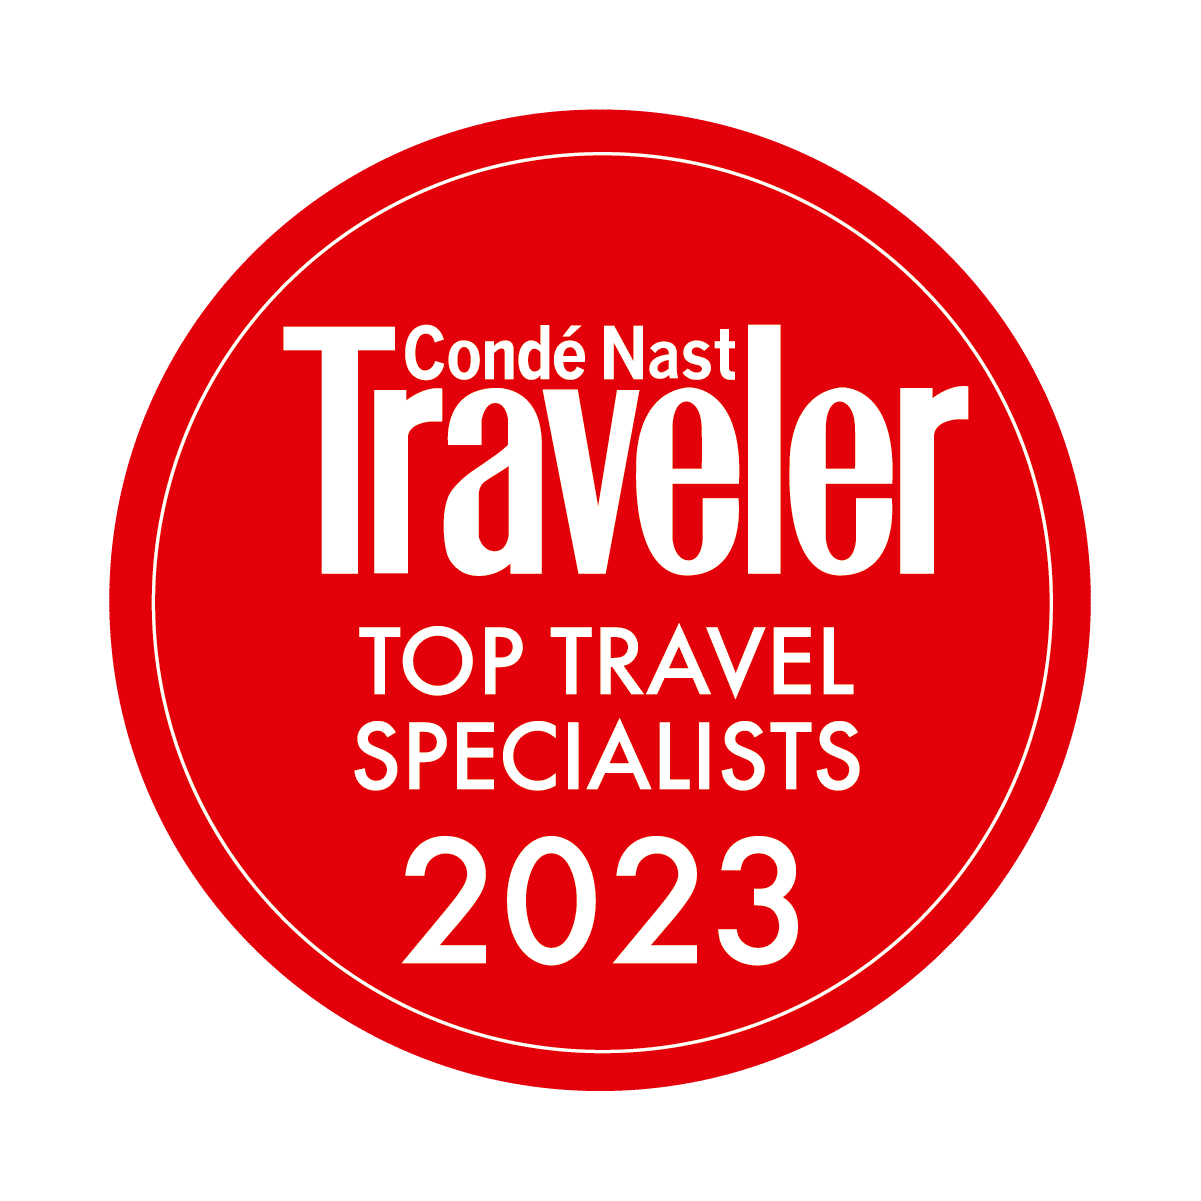 Us Travelspecialists 2023 Seal 1000x